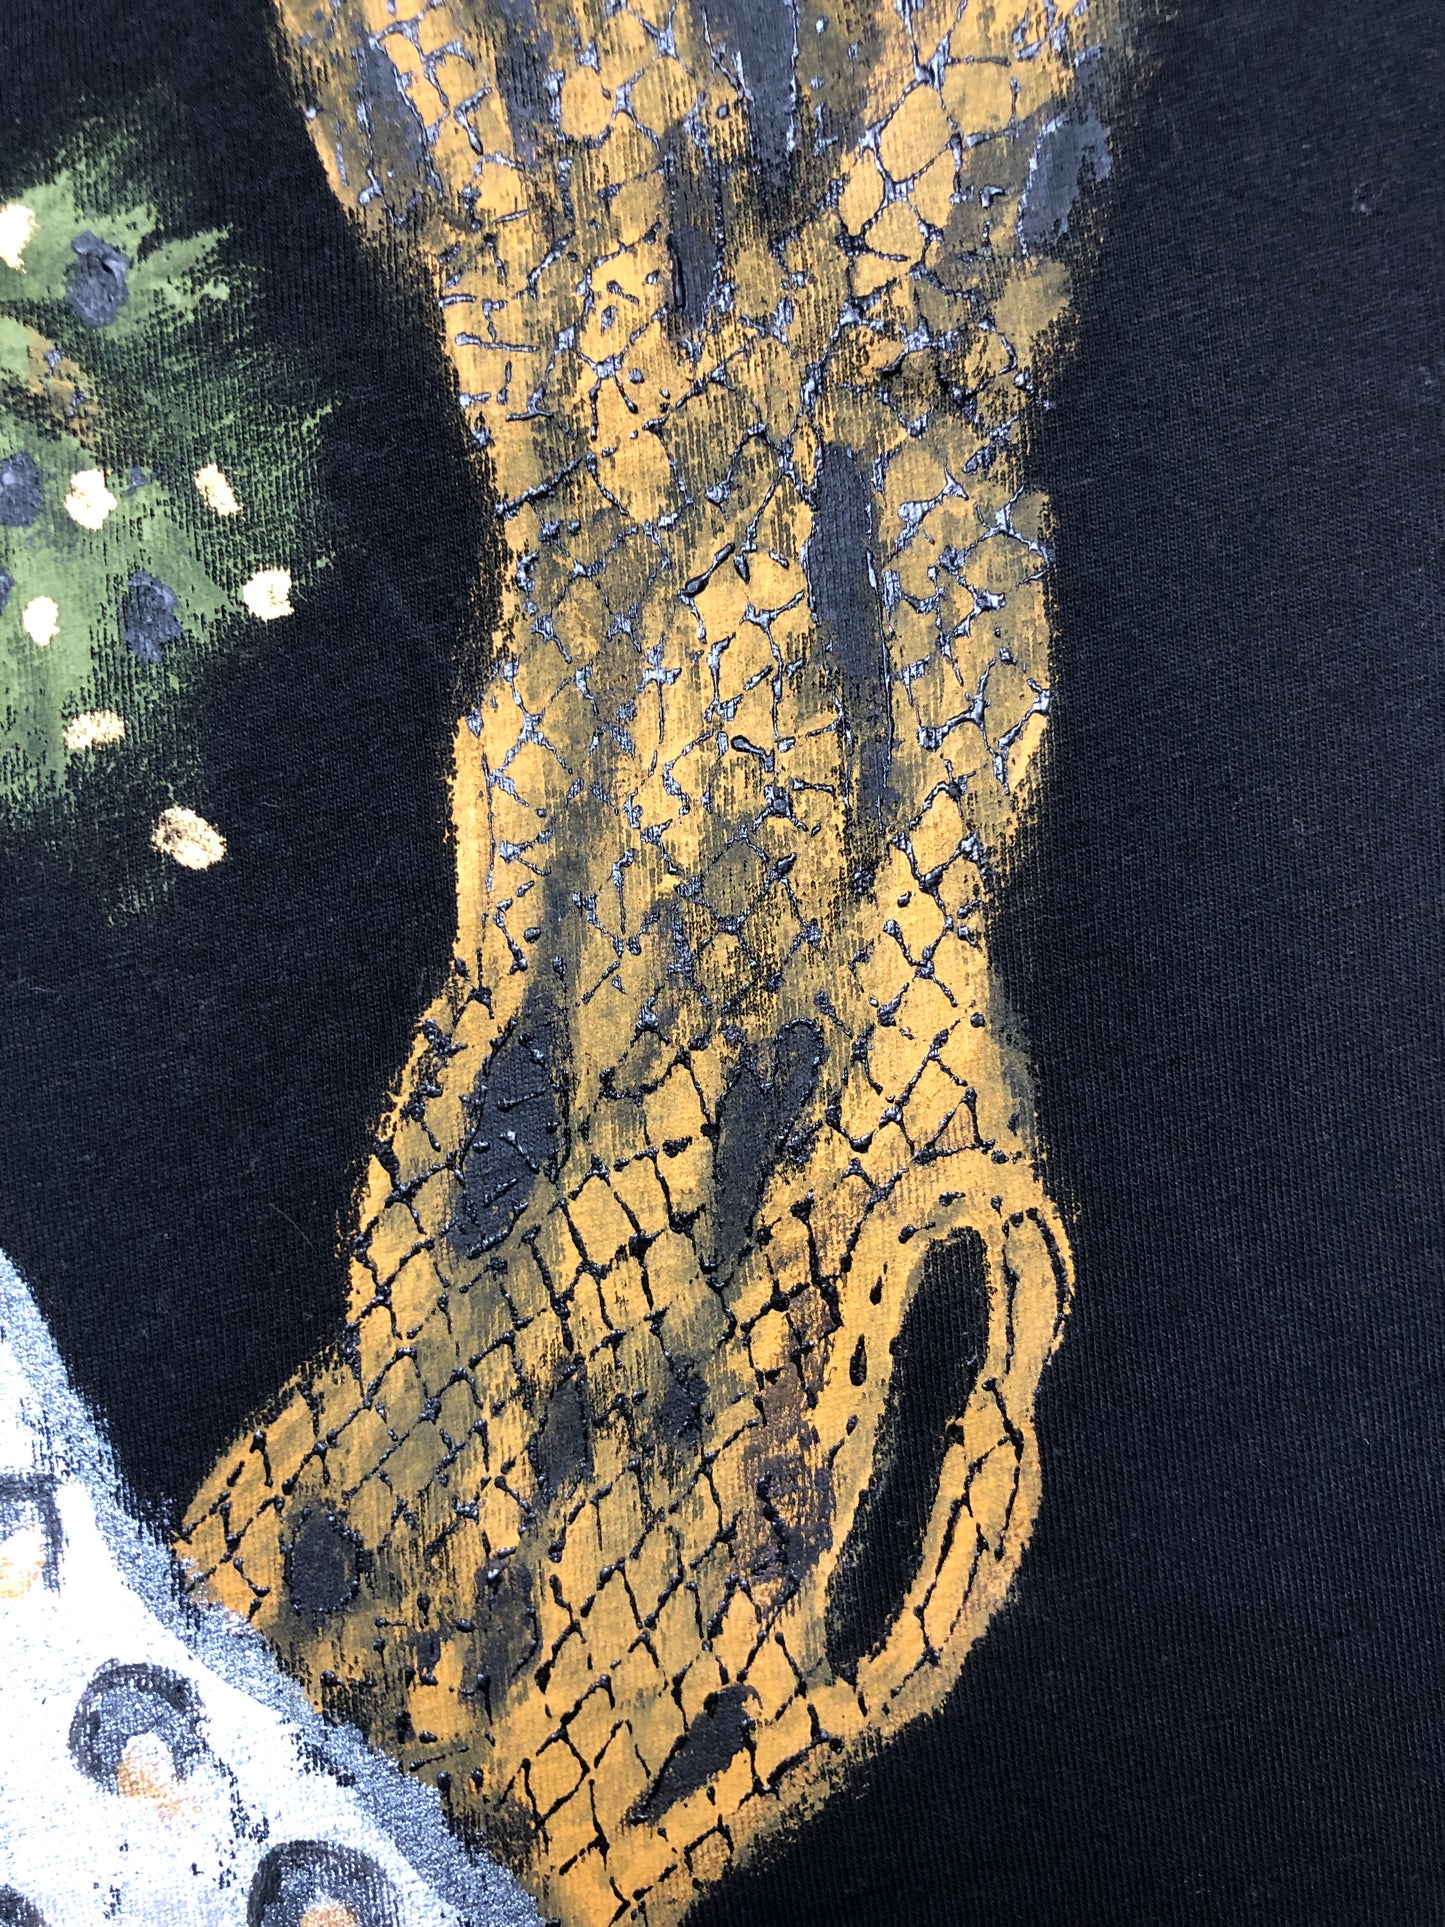 Detailed tree bark in an exquisite pattern on a women's t-shirt